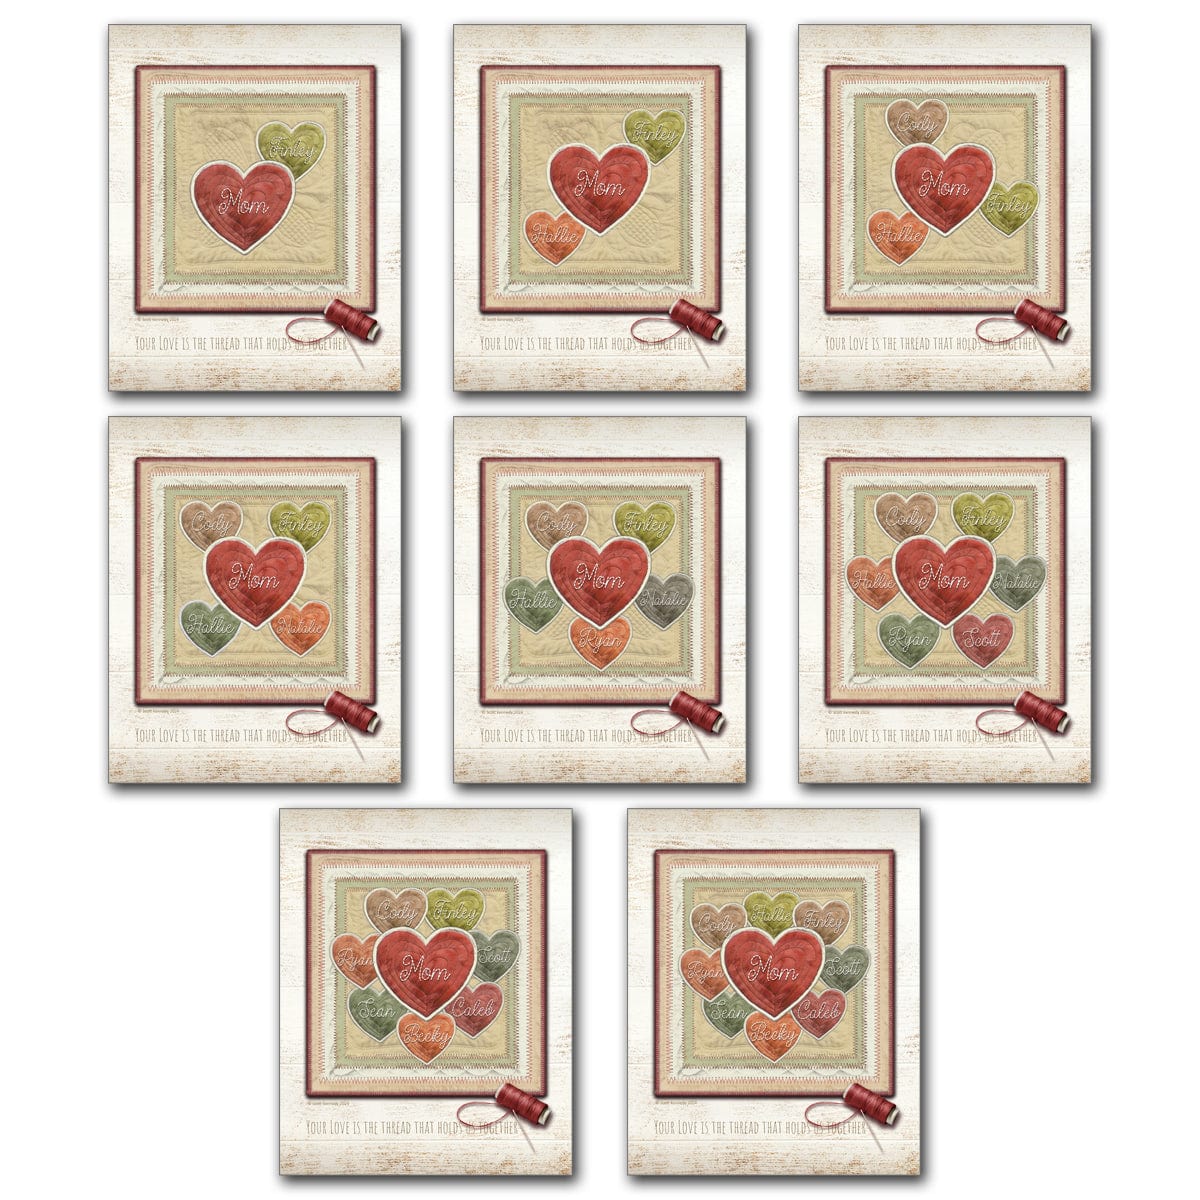 Available with 1-8 personalized small hearts for each child